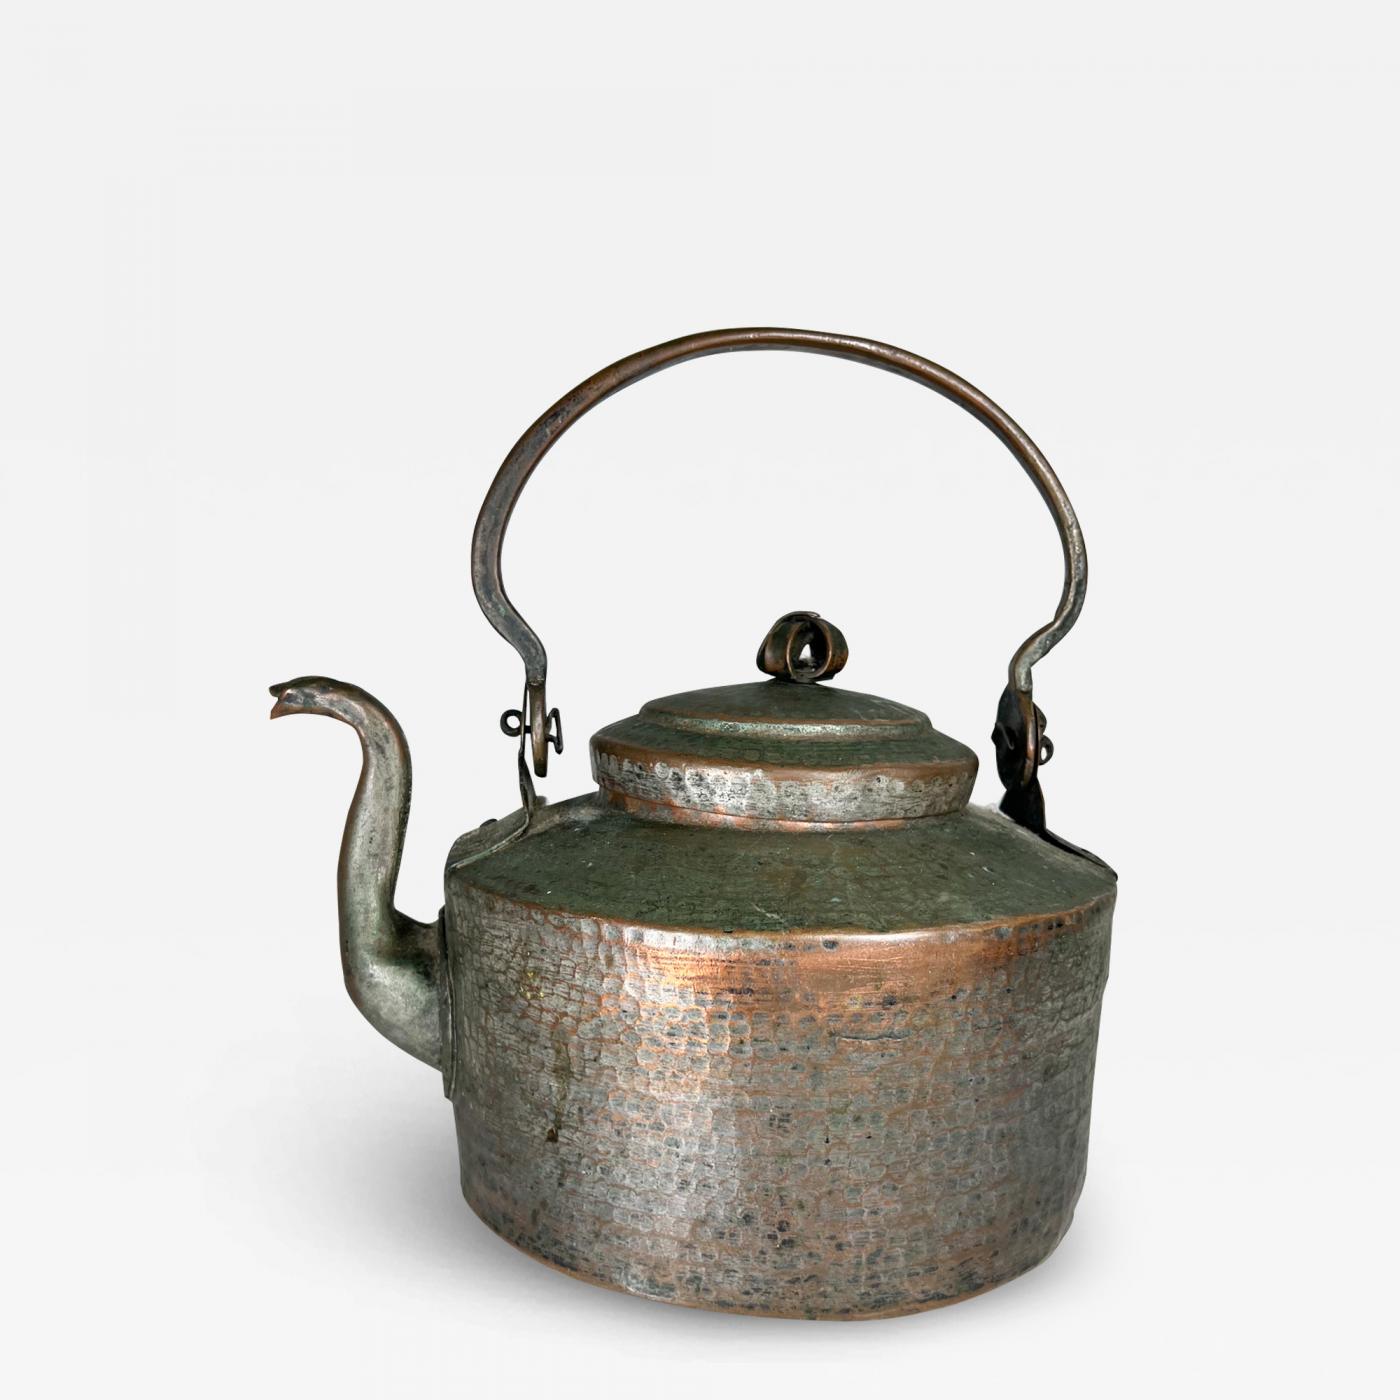 https://cdn.incollect.com/sites/default/files/zoom/Antique-Hammered-Copper-Tea-Kettle-with-Flair-623527-2971949.jpg